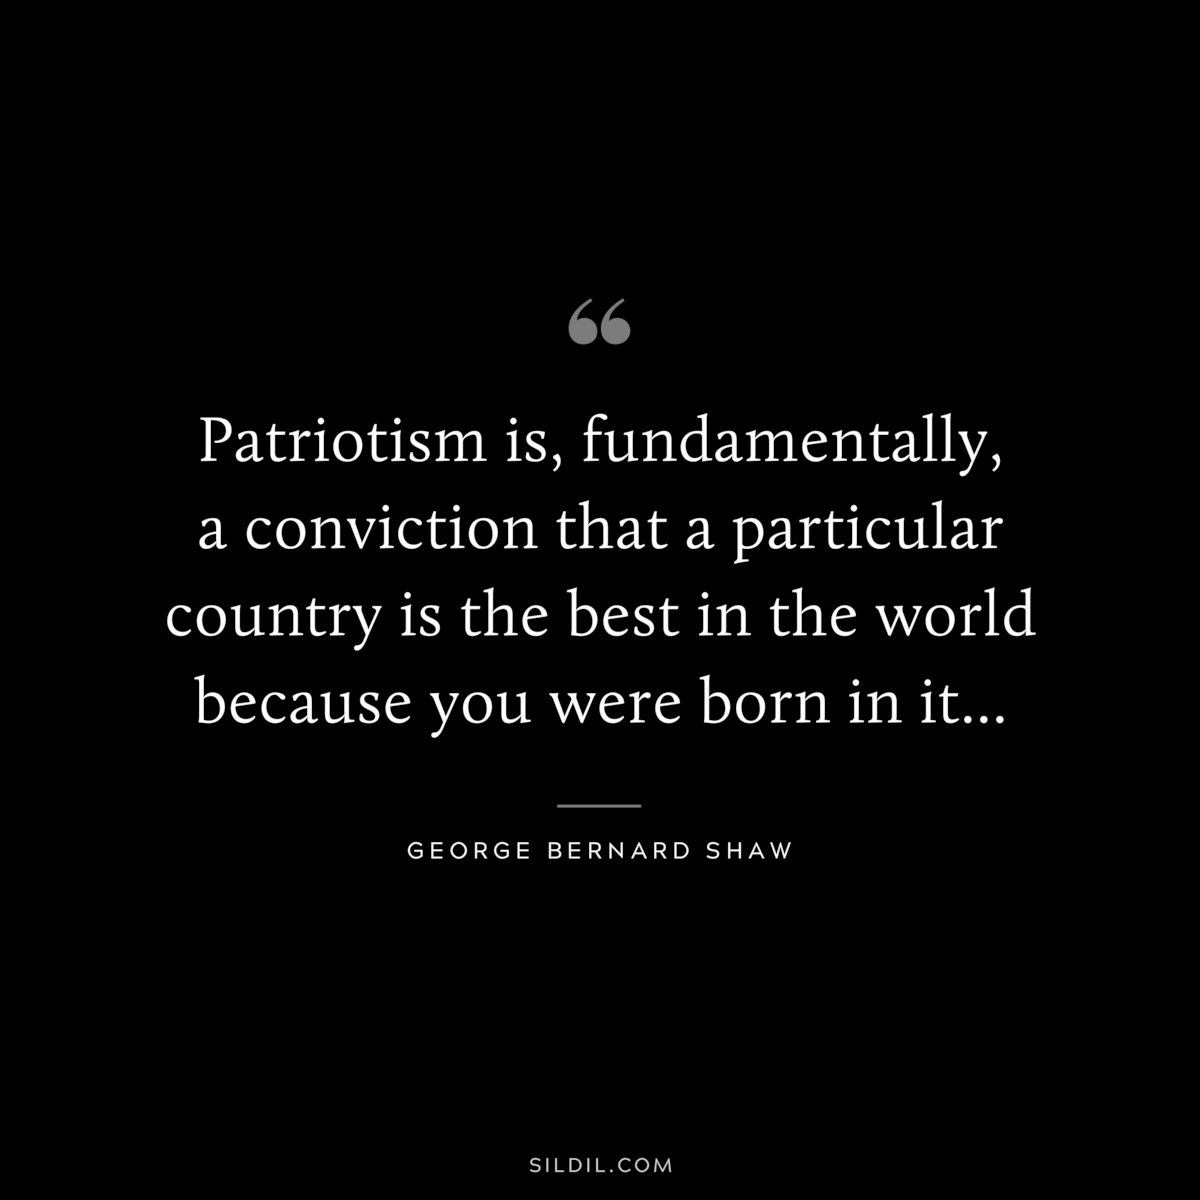 Patriotism is, fundamentally, a conviction that a particular country is the best in the world because you were born in it... ― George Bernard Shaw